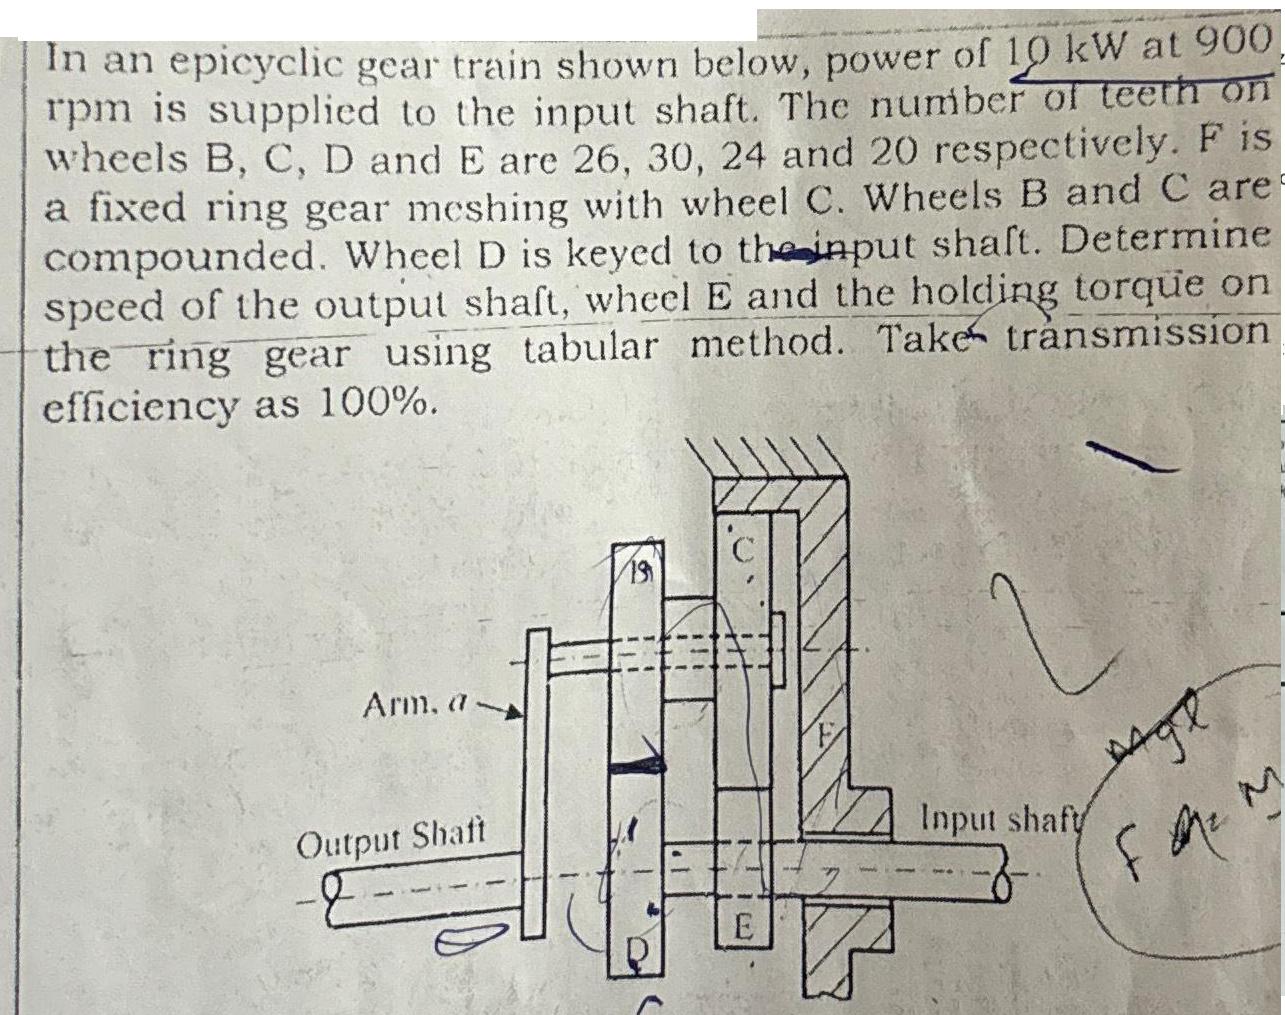 In an epicyclic gear train shown below, power of 10 kW at 900 rpm is supplied to the input shaft. The number